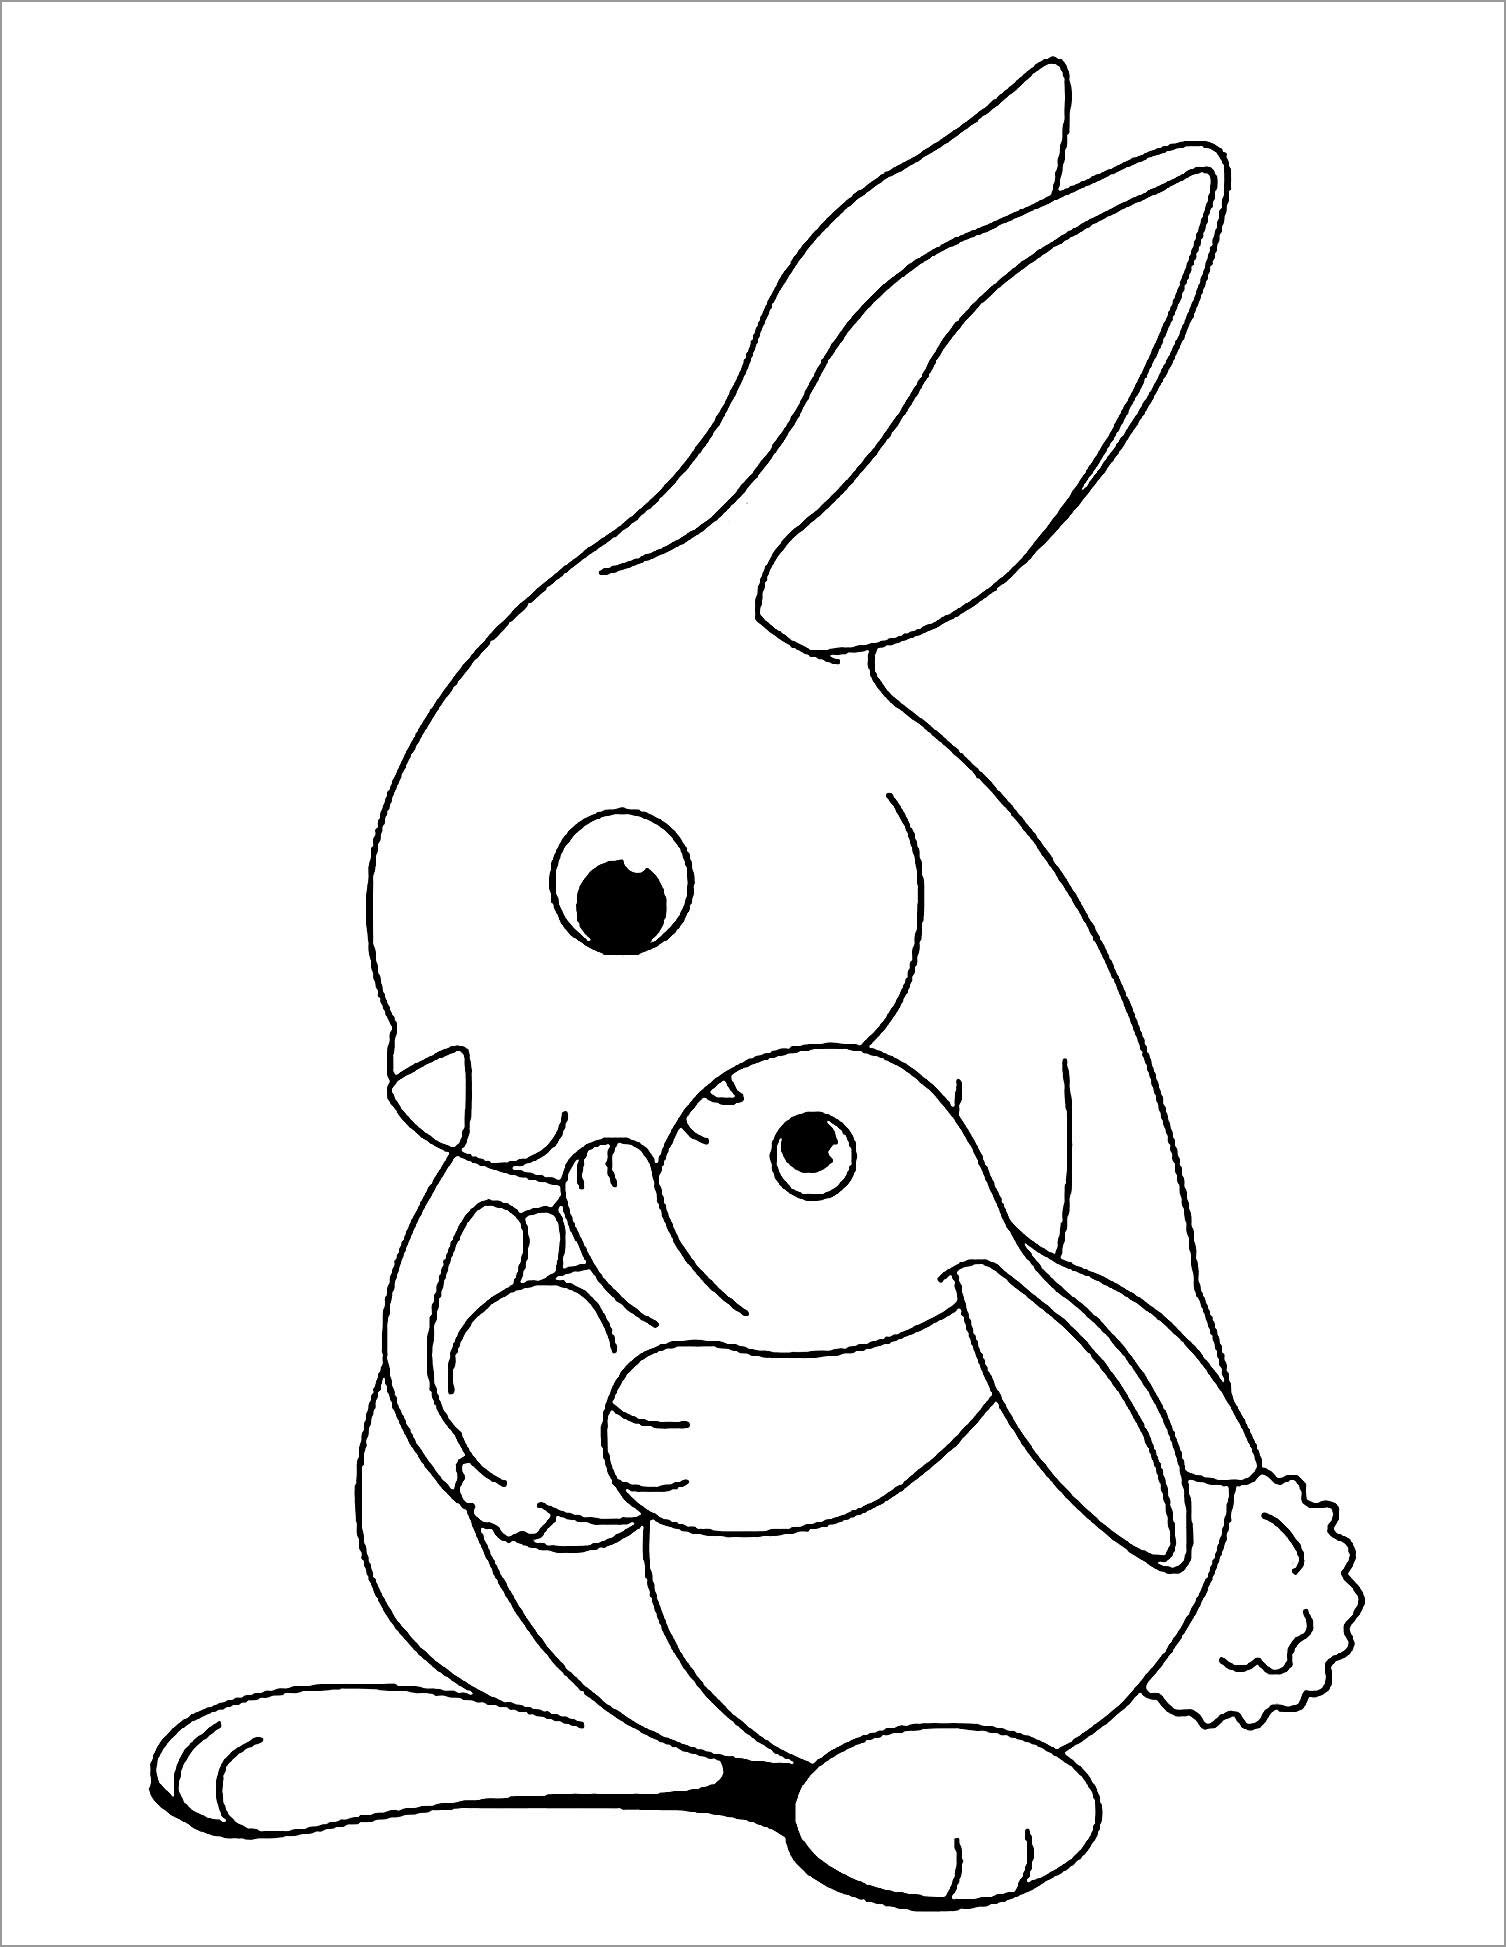 Rabbit Coloring Pages - ColoringBay